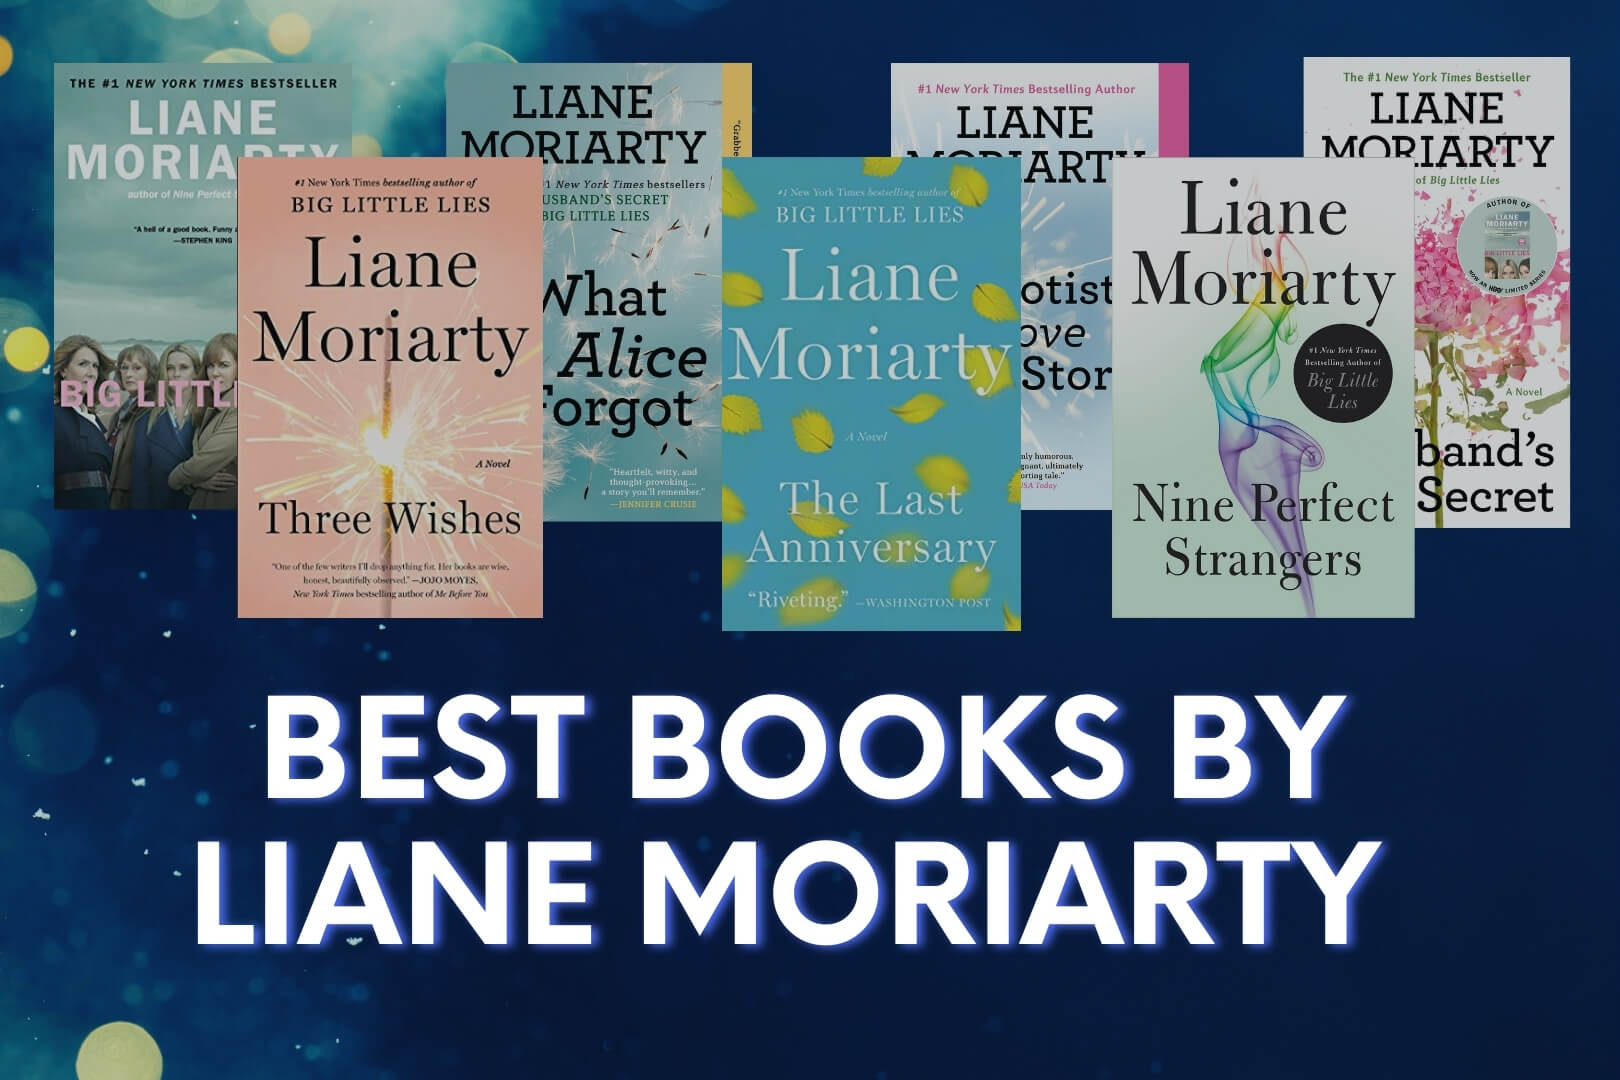 Ranking the Best Books by Liane Moriarty